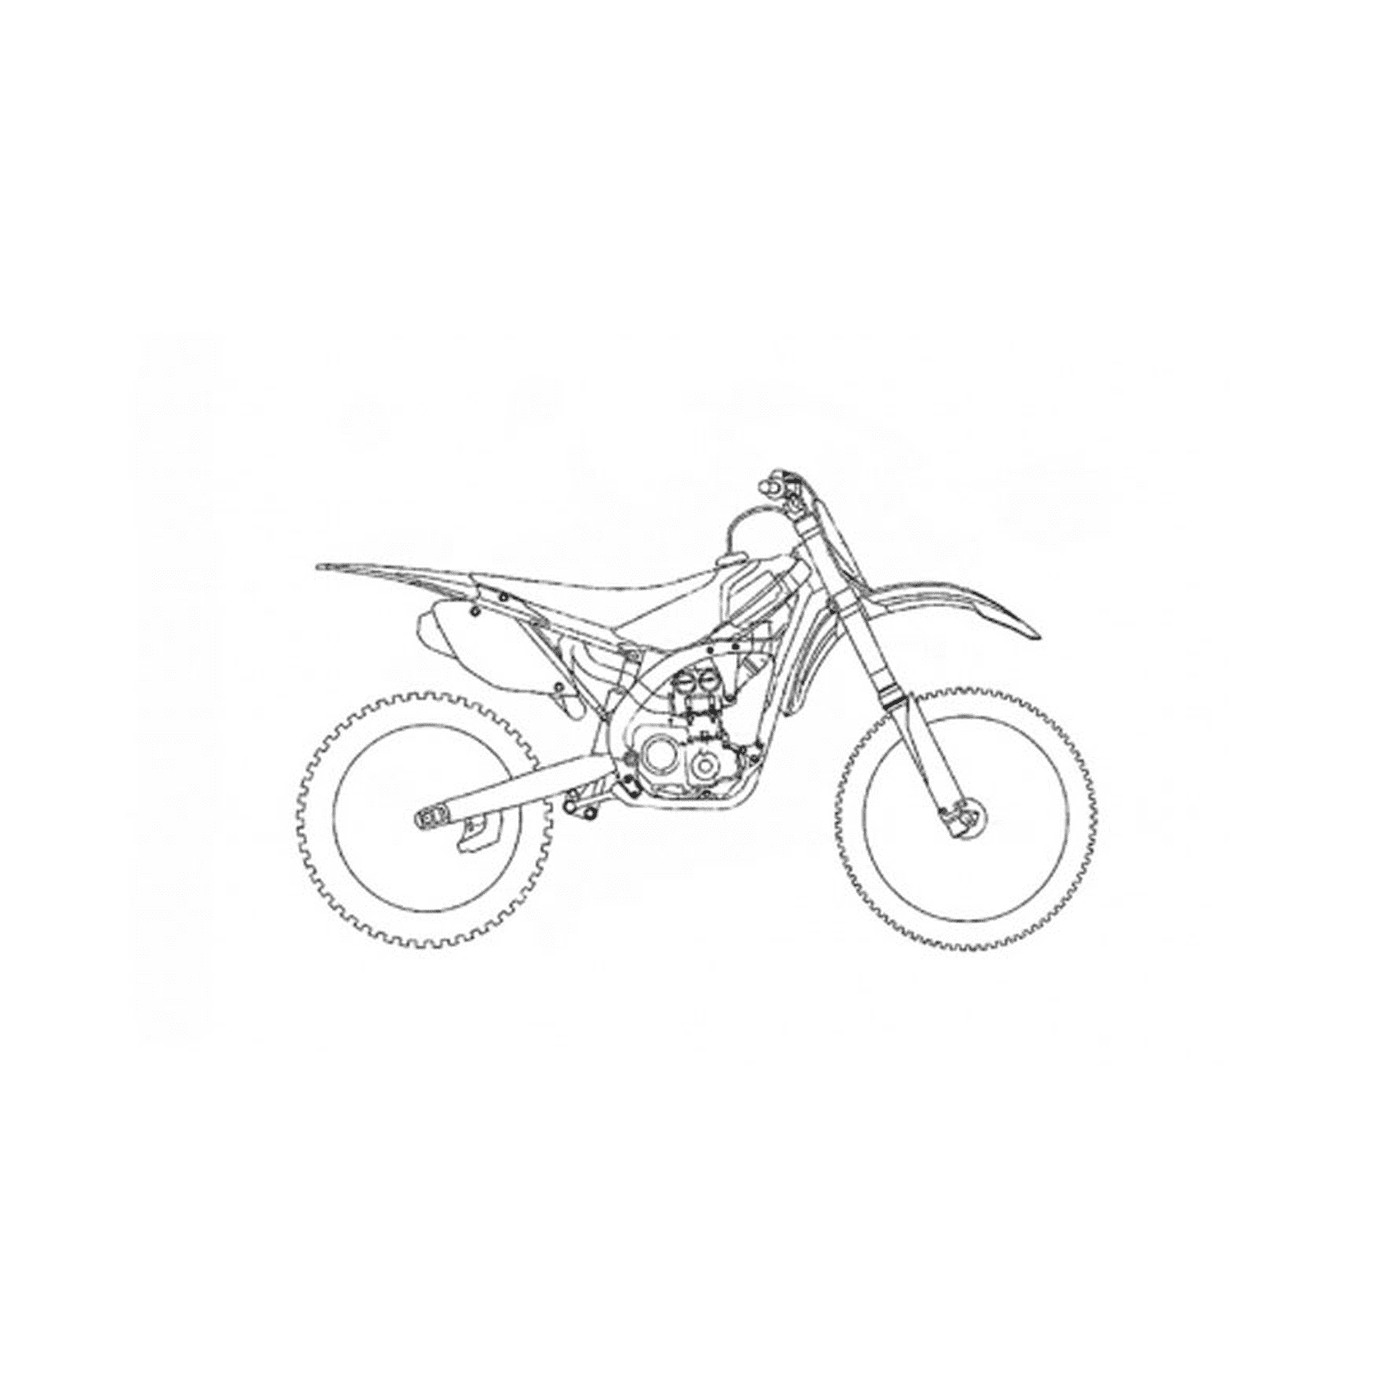  Trial motorcycle on white background 